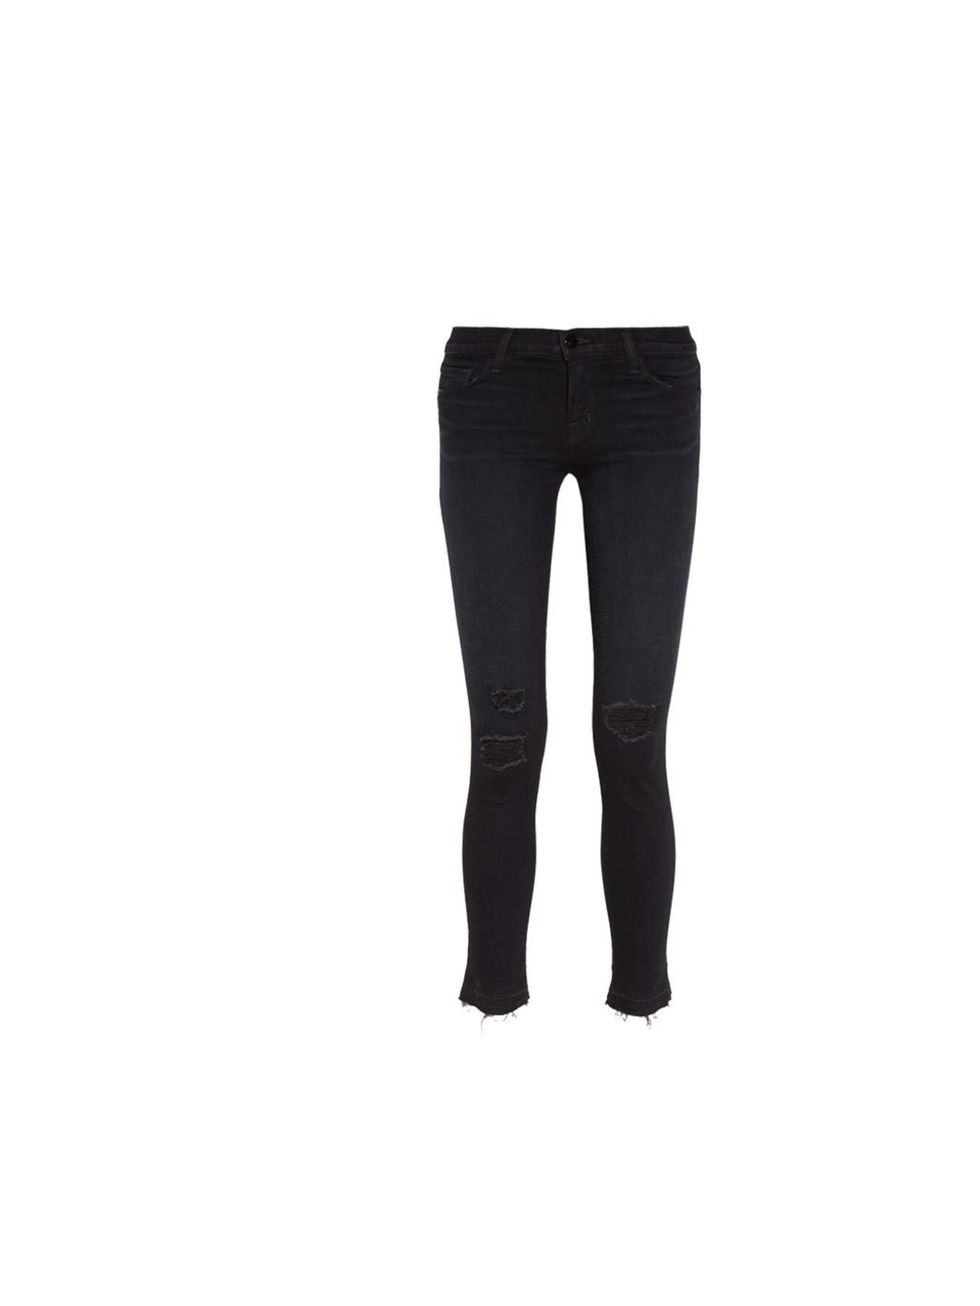 <p>Faded, shredded and cropped, what's not to love about J Brand's 811 jeans, £255, at <a href="http://www.net-a-porter.com/product/380700">Net-a-Porter</a></p>